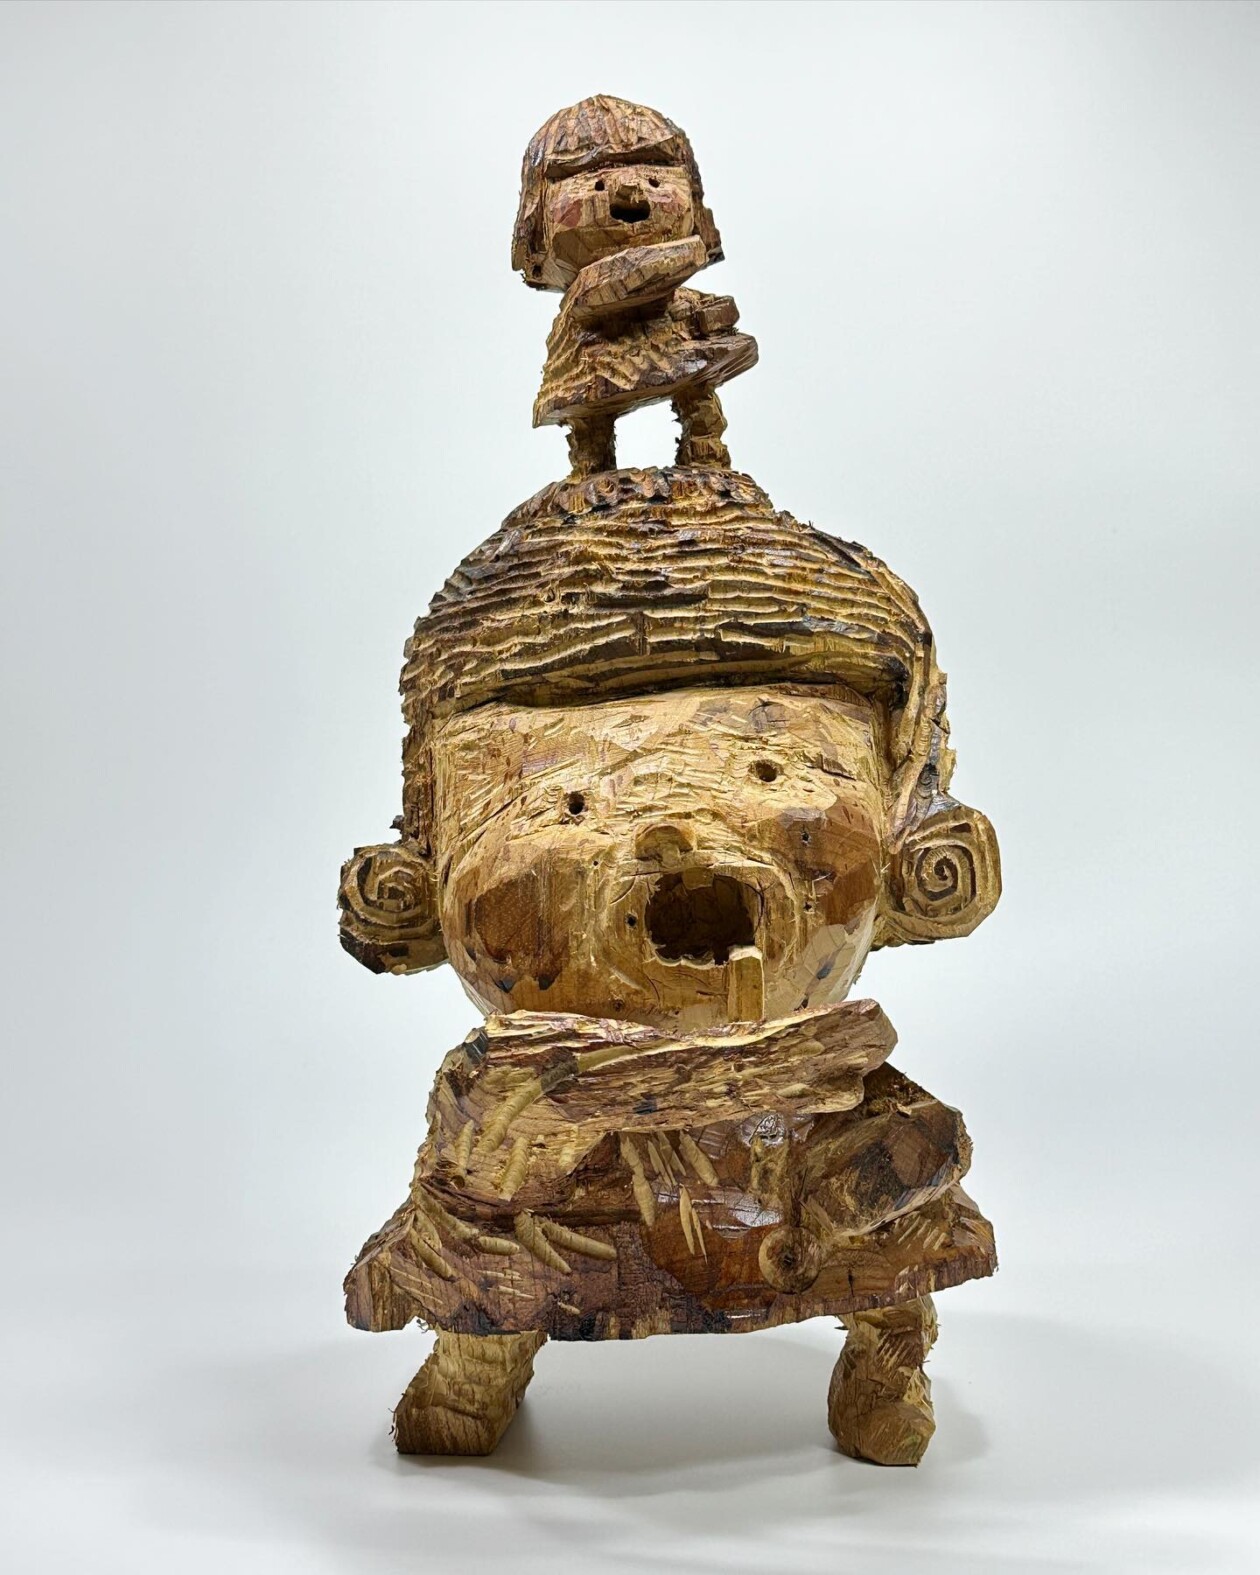 The Enchanting World Of Hirosuke Yabe's Wooden Beings (18)